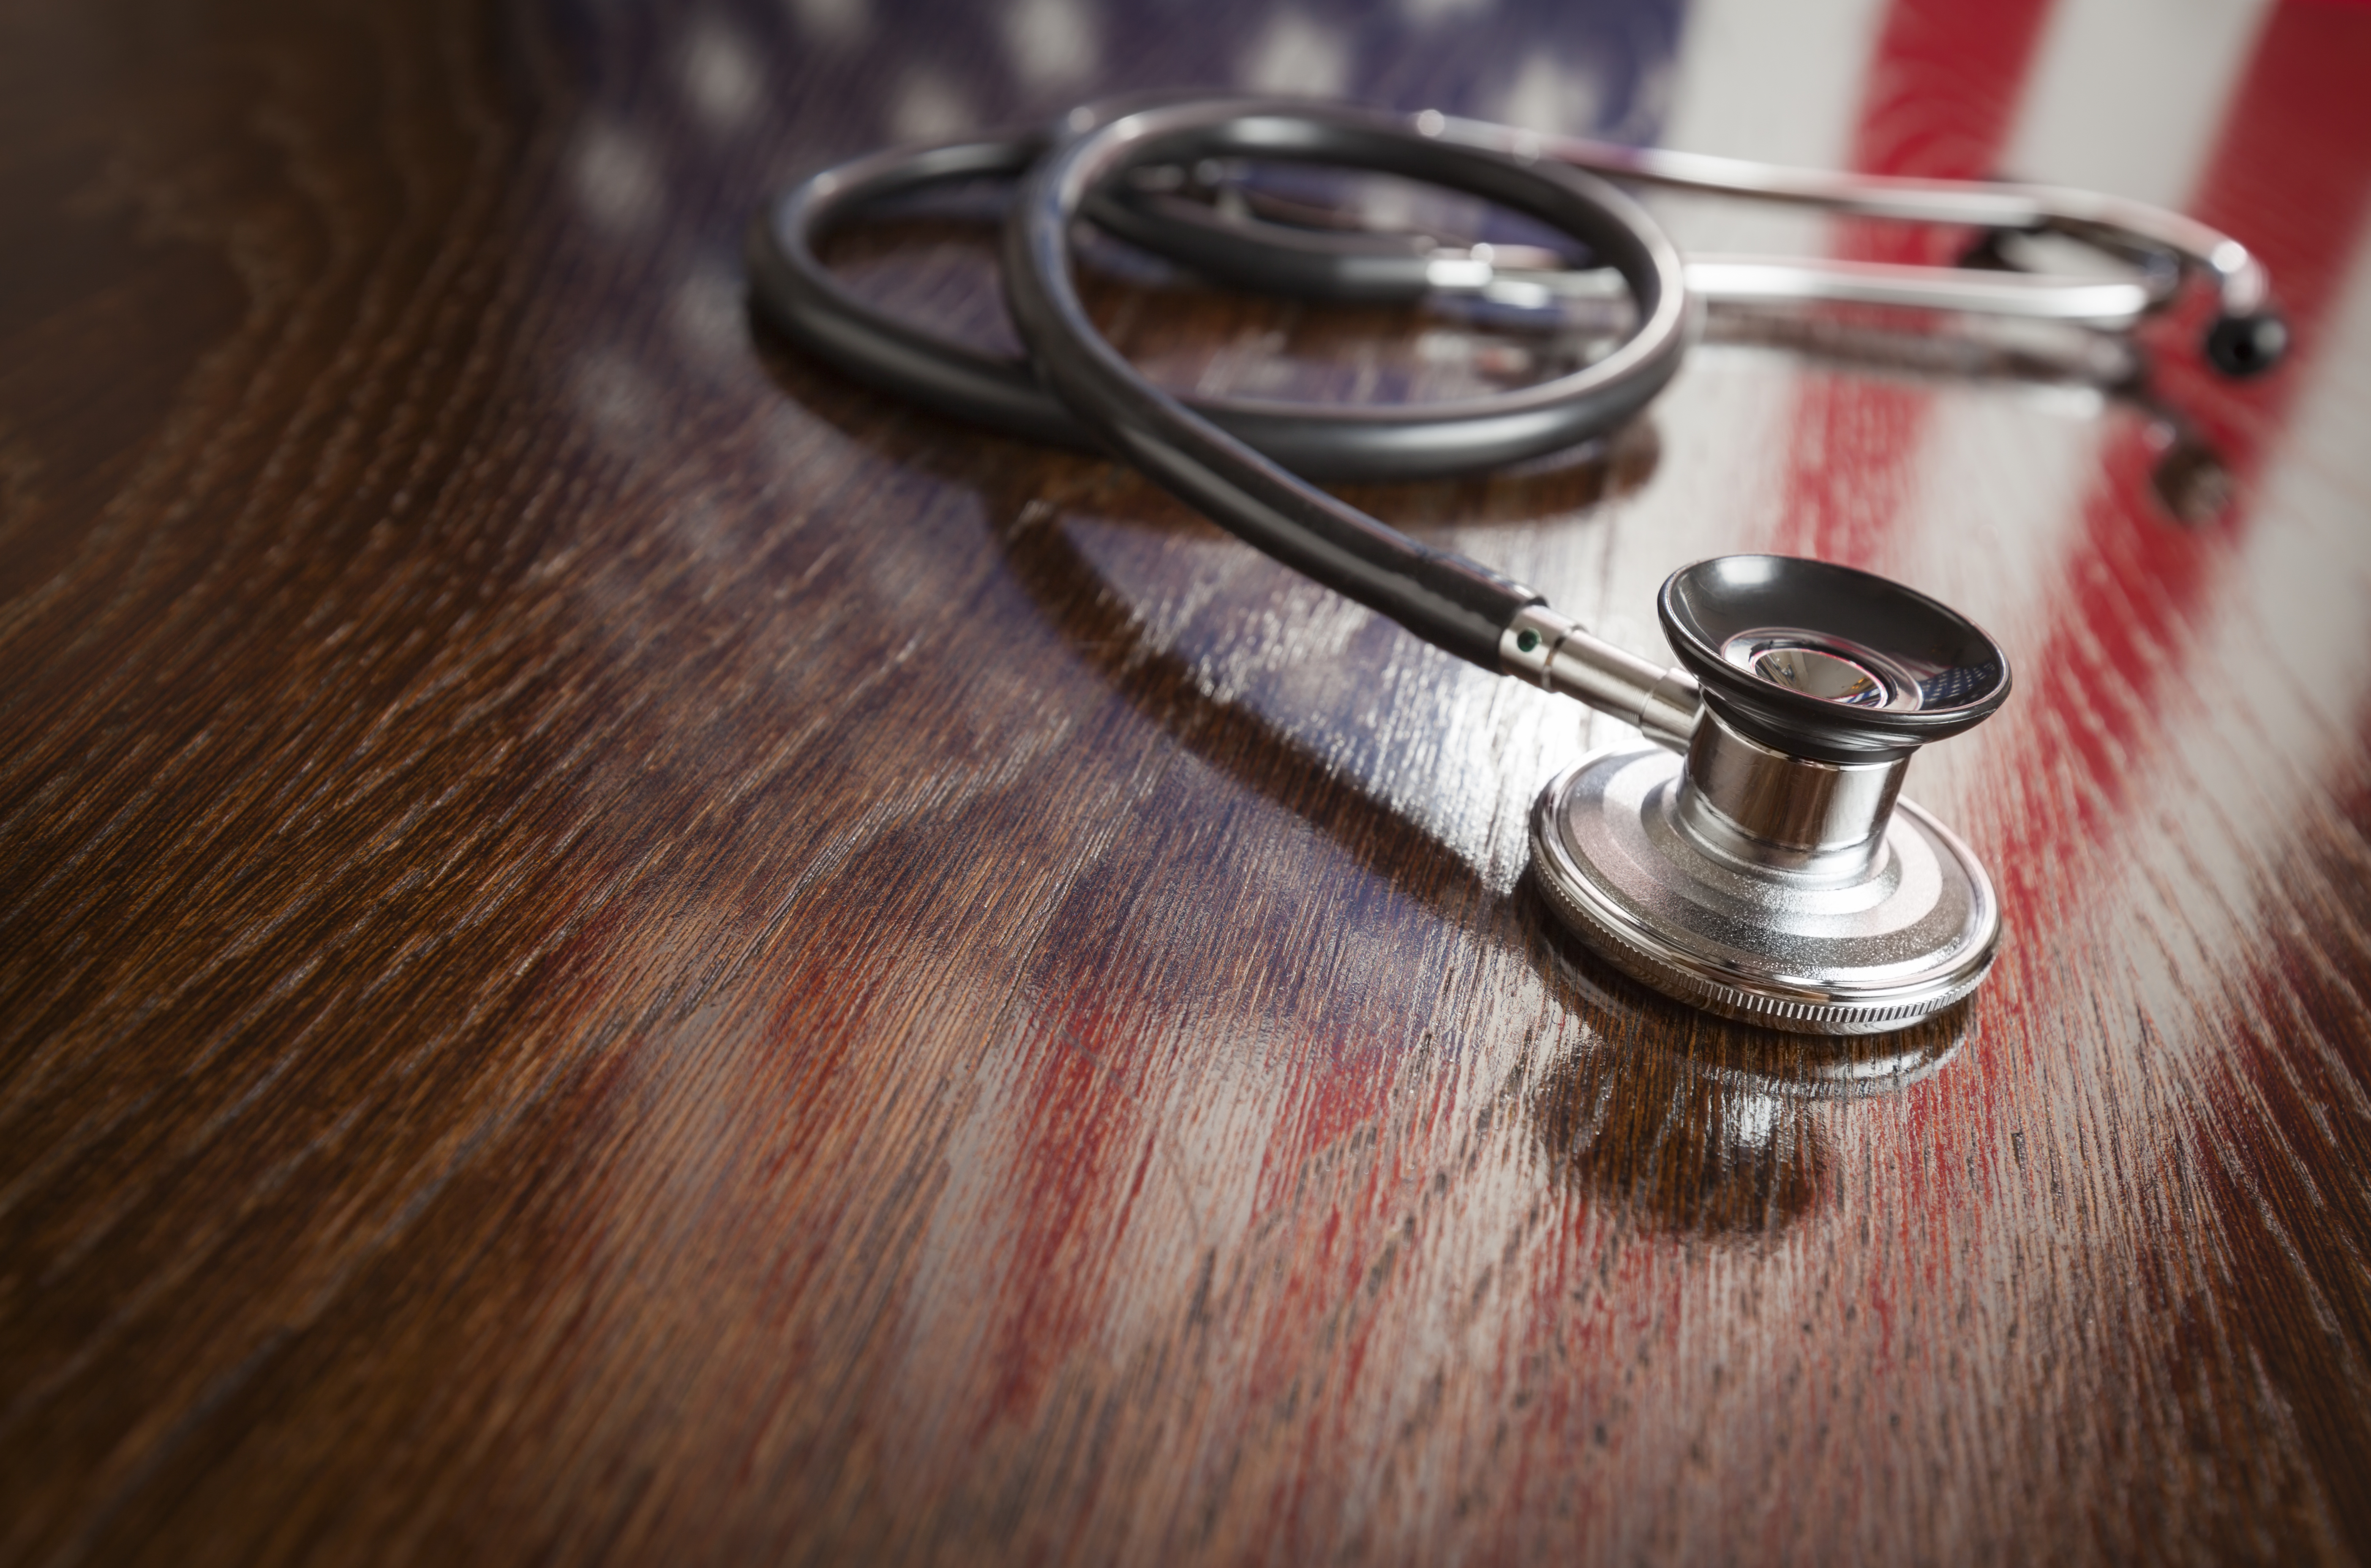 Stethoscope on wooden table with American flag reflected on the wood